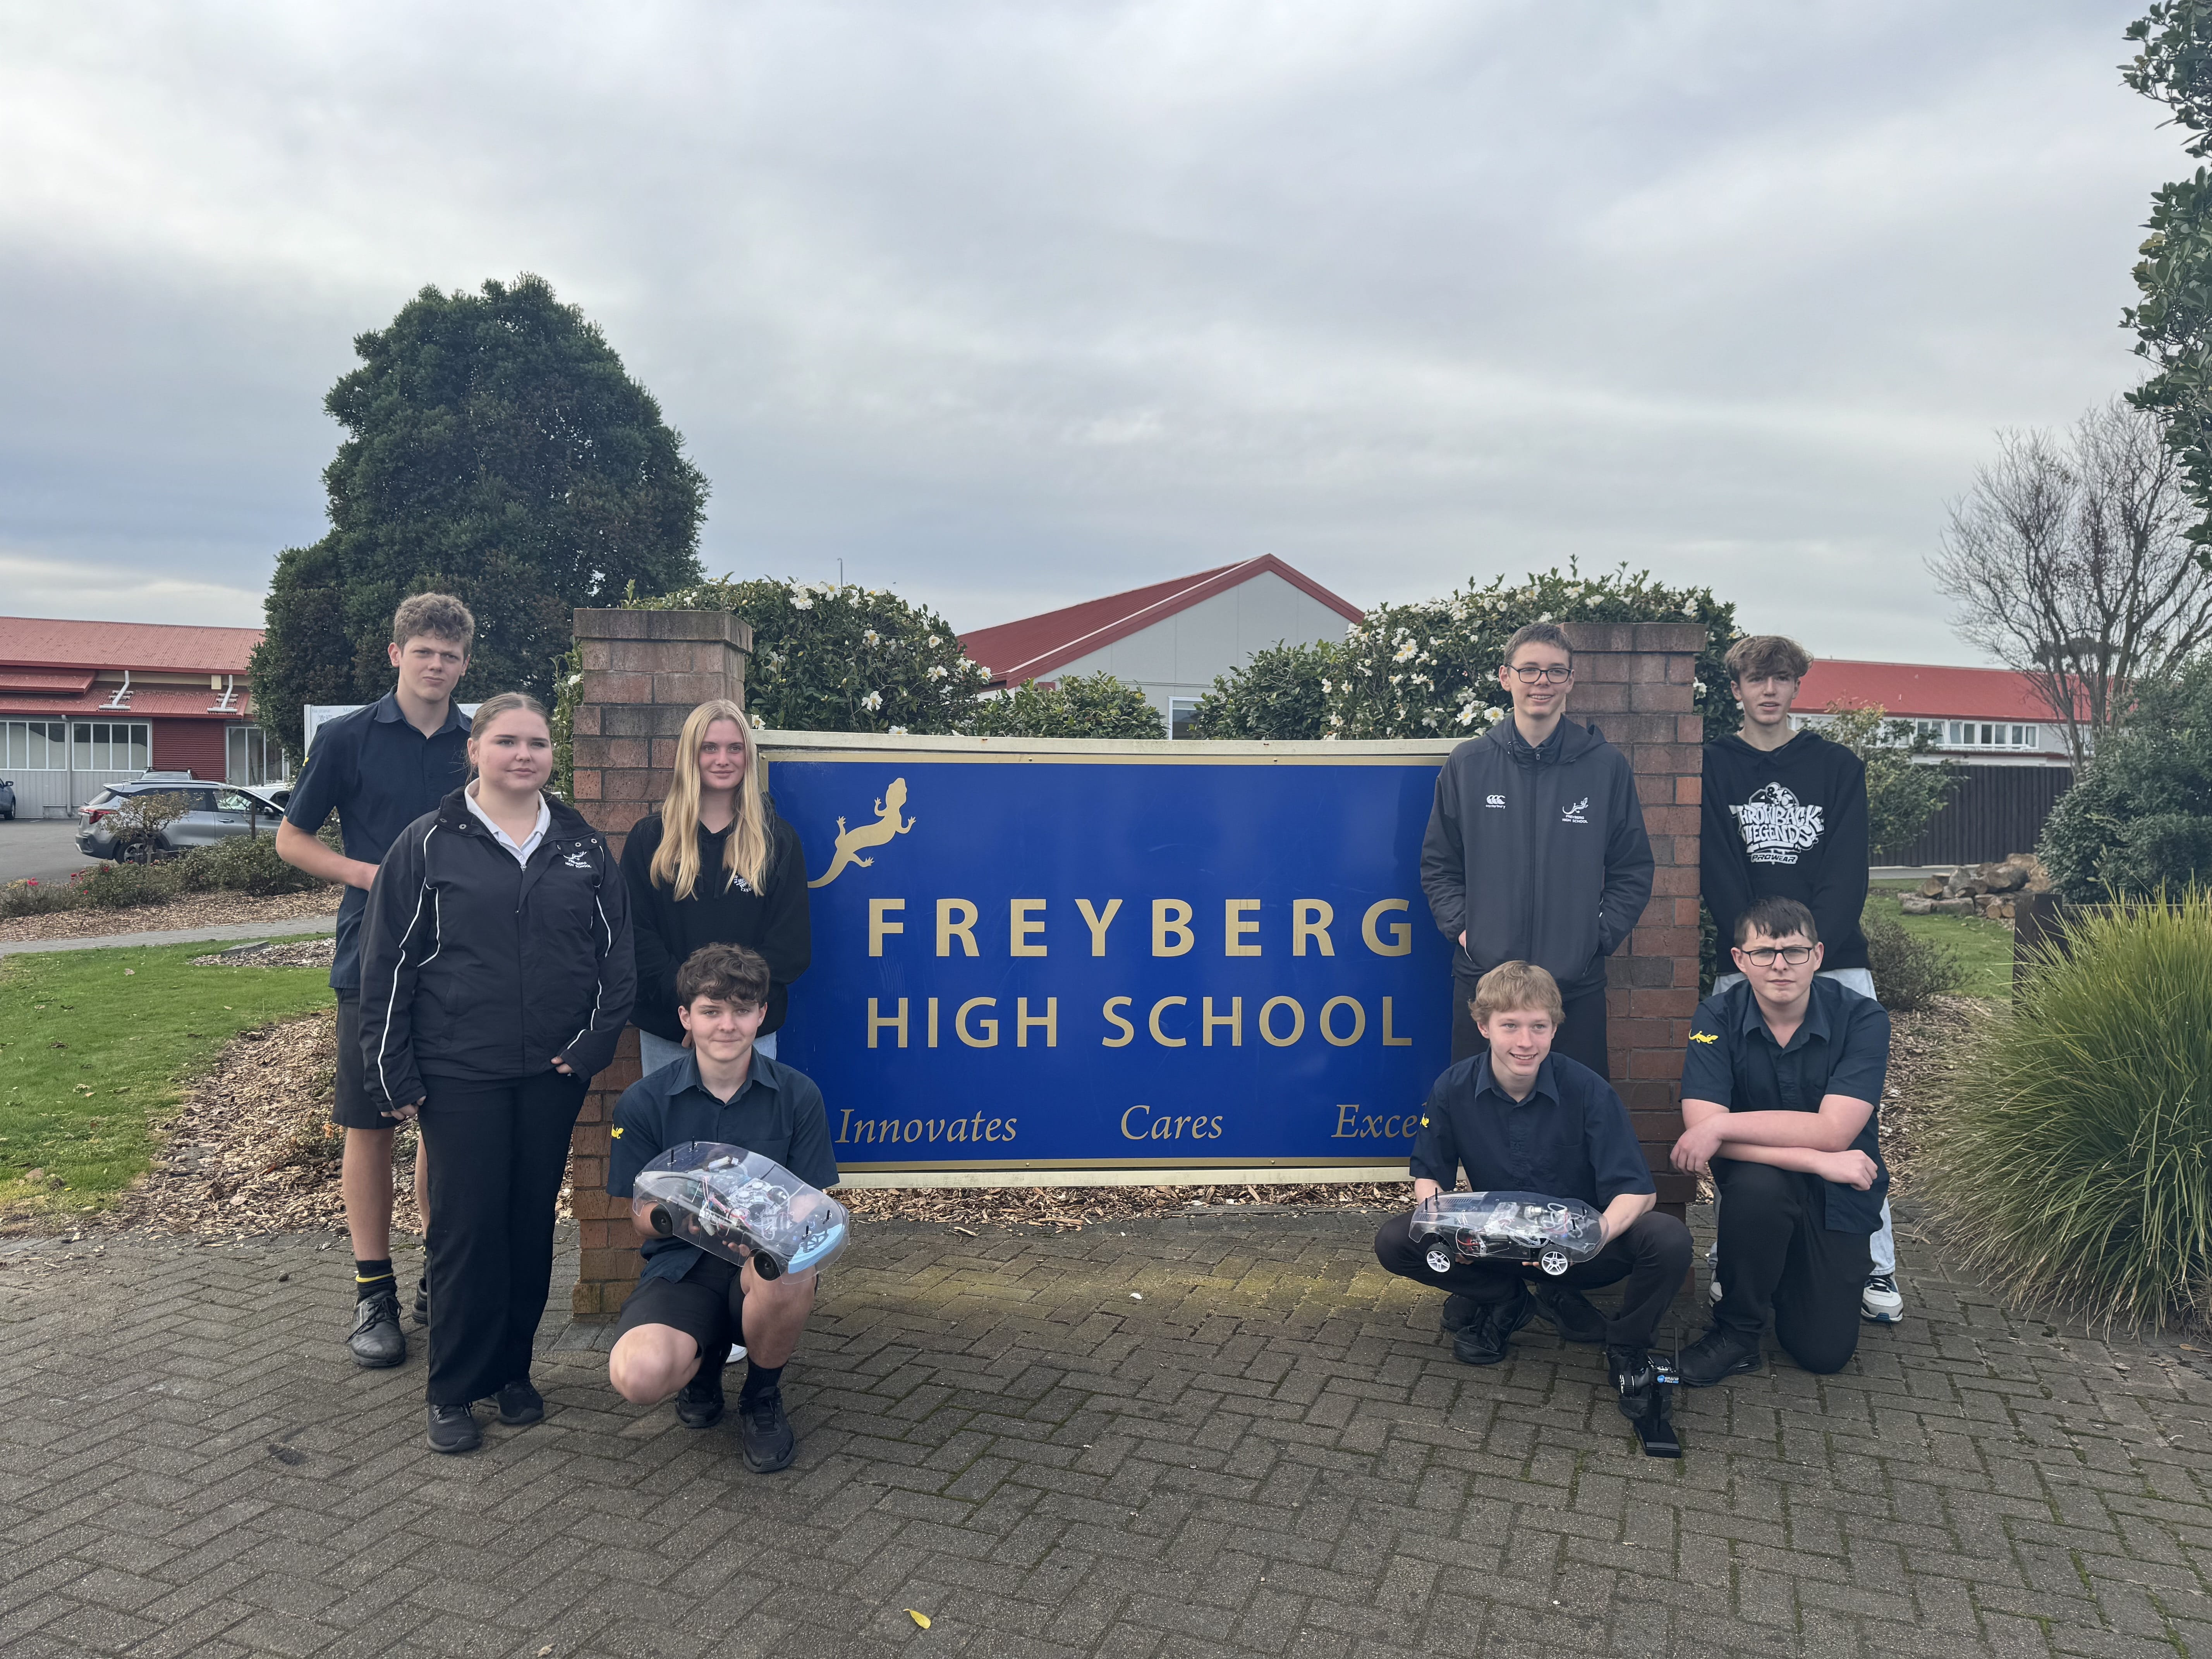 Eight young people from Freyberg High School gathered around their school's sign. Two boys in the front are holding hydrogen remote control cars.